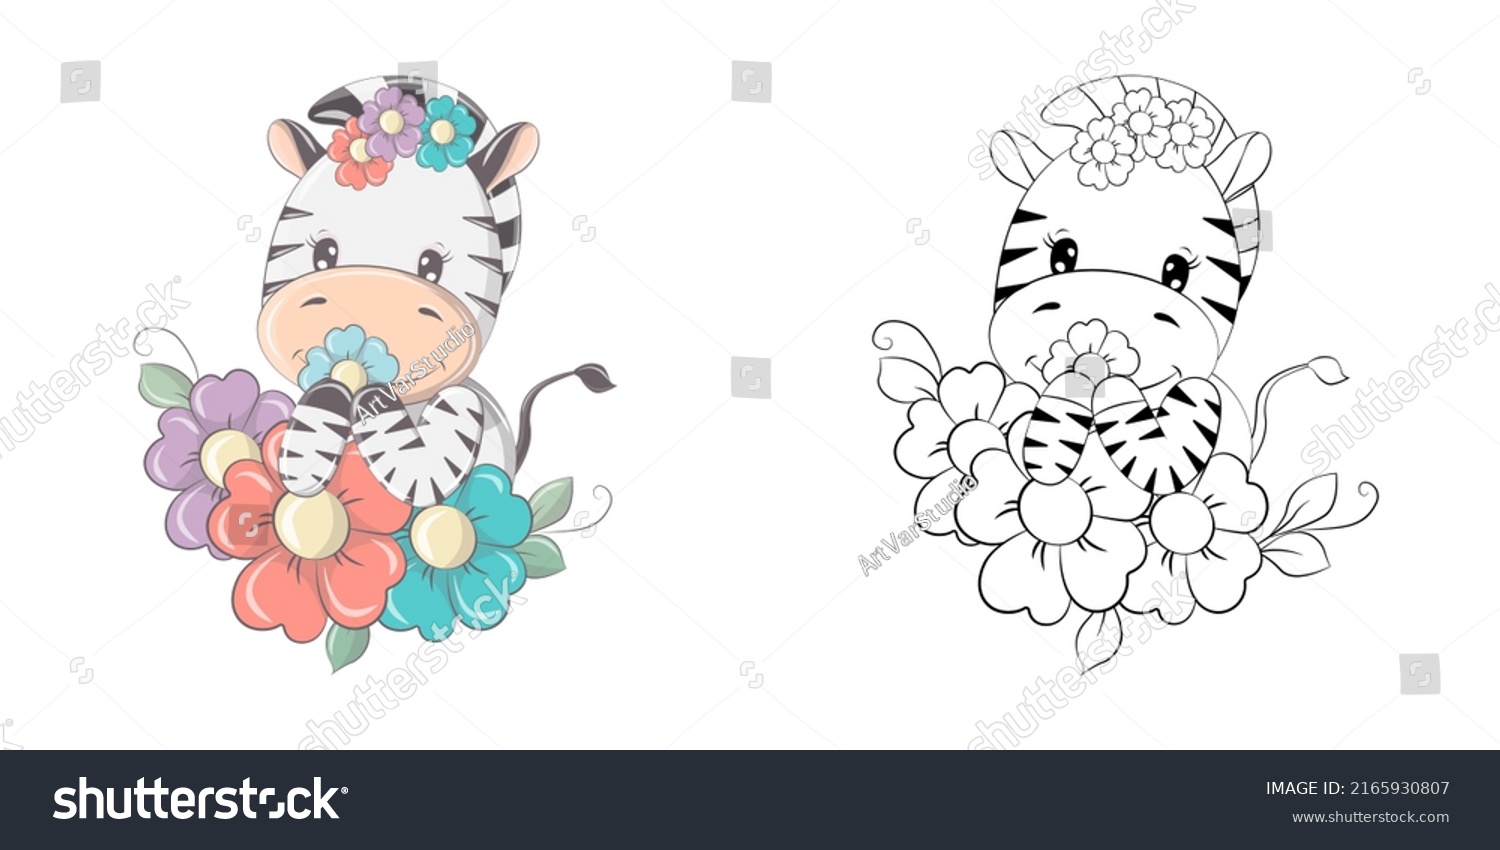 SVG of Zebra Clipart Multicolored and Black and White. Beautiful Clip Art Zebra in Colorful Flowers. Vector Illustration of an Animal for Prints for Clothes, Stickers, Baby Shower, Coloring Pages.  svg